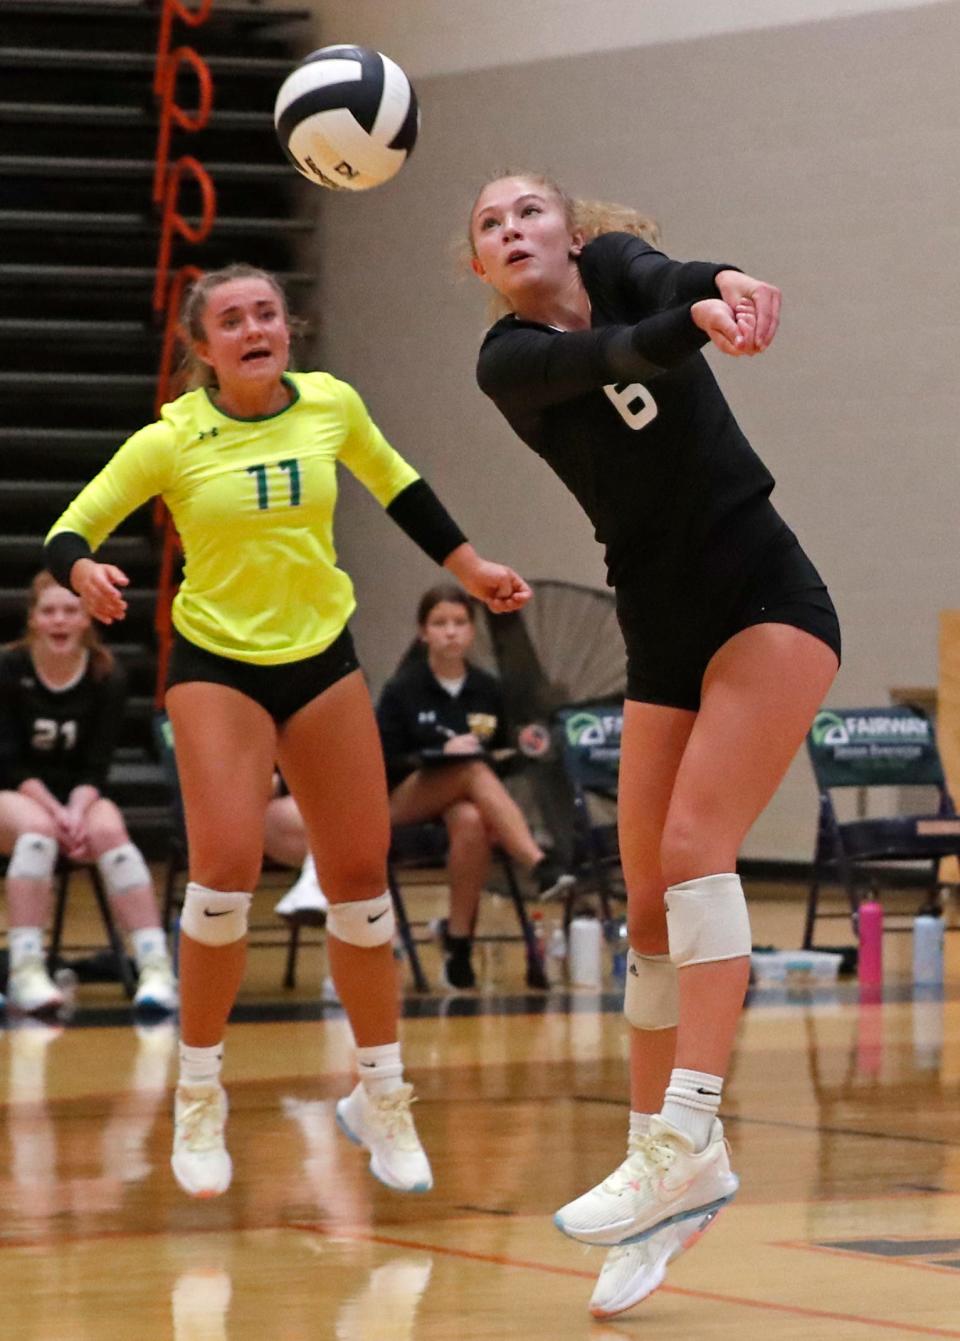 Benton Central outside hitter Sienna Foster (6) hits the ball during the IHSAA volleyball match against Harrison, Tuesday, Aug. 16, 2022, at Harrison High School in West Lafayette, Ind.